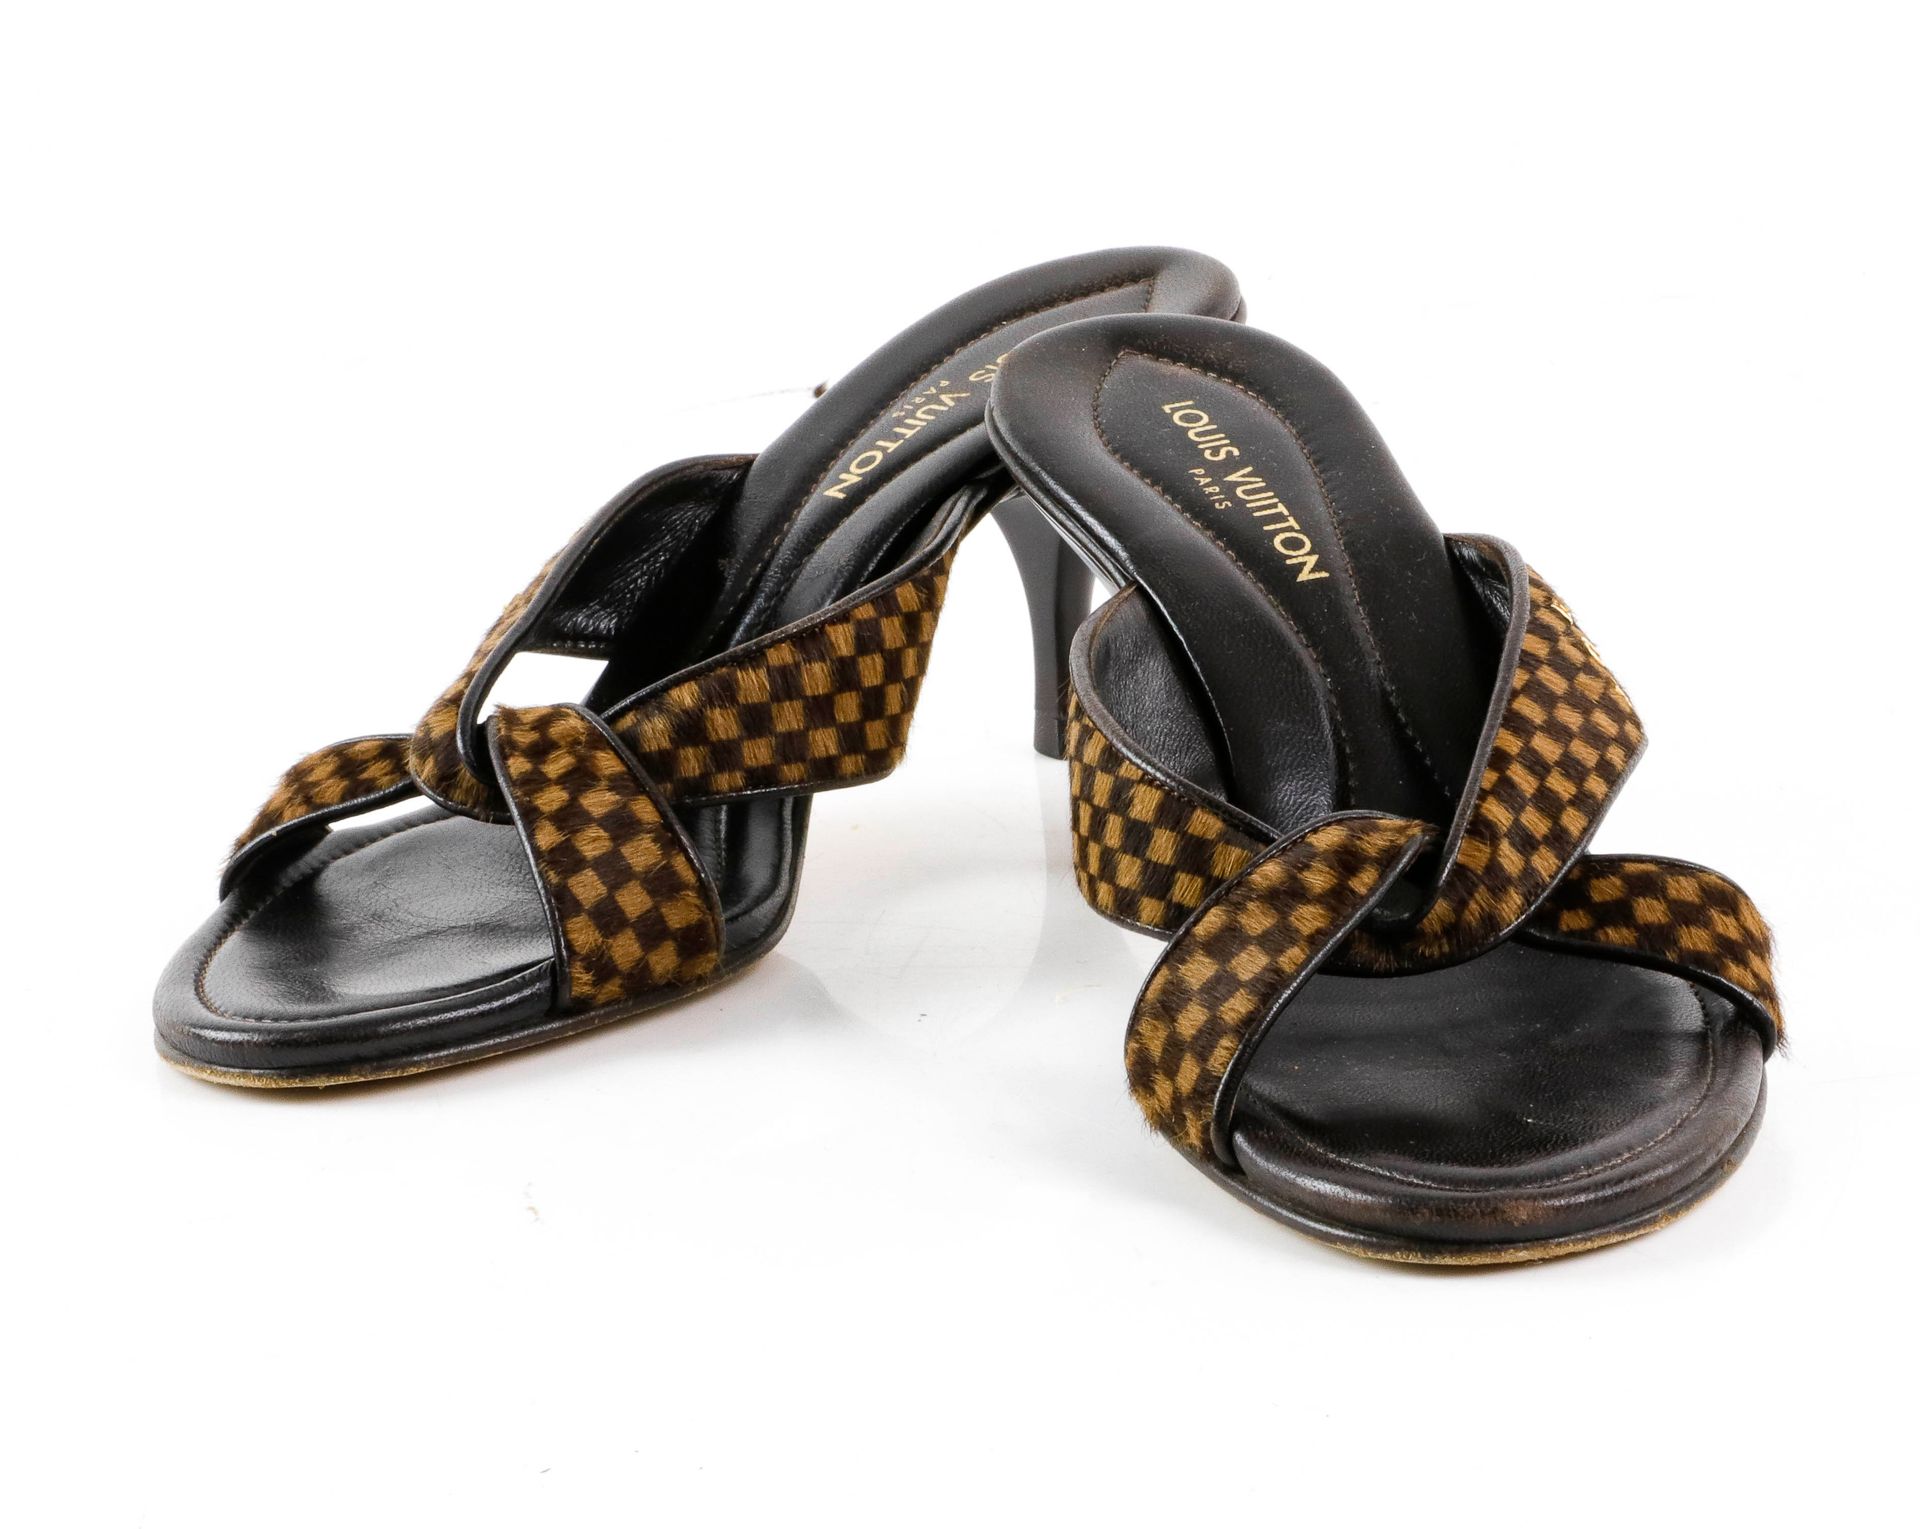 Null Louis VUITTON. Pair of brown leather and checkerboard pumps - Size 37